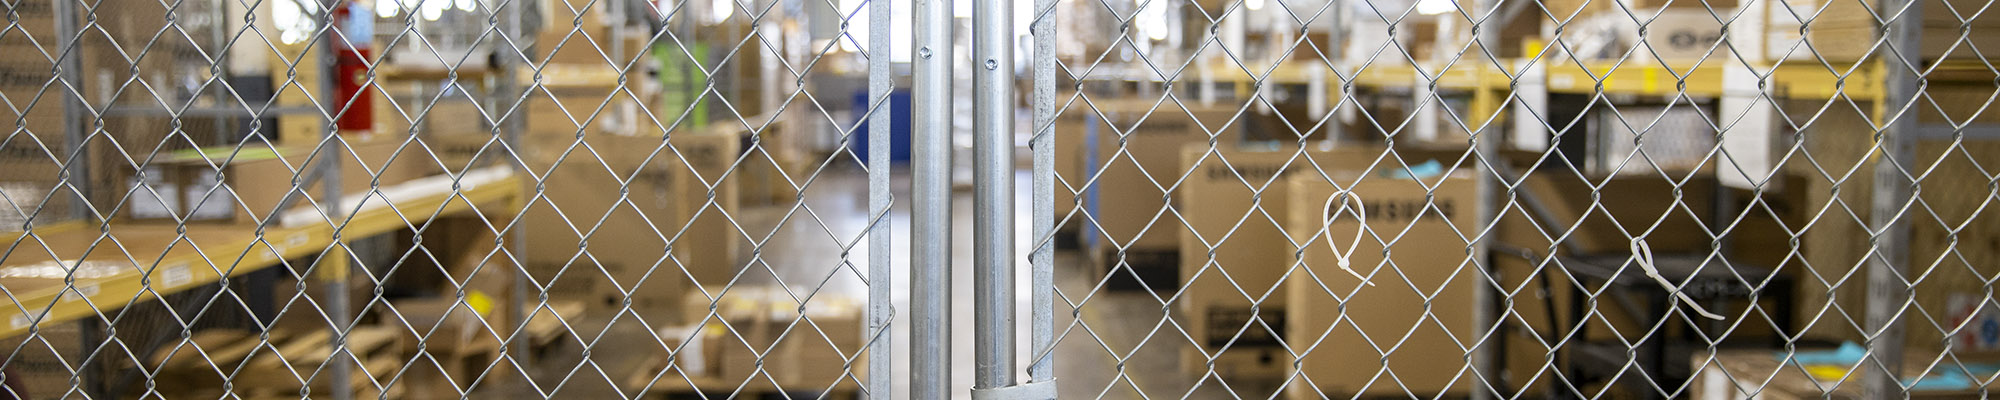 Chainlink fencing containing stored materials in the U Market warehouse